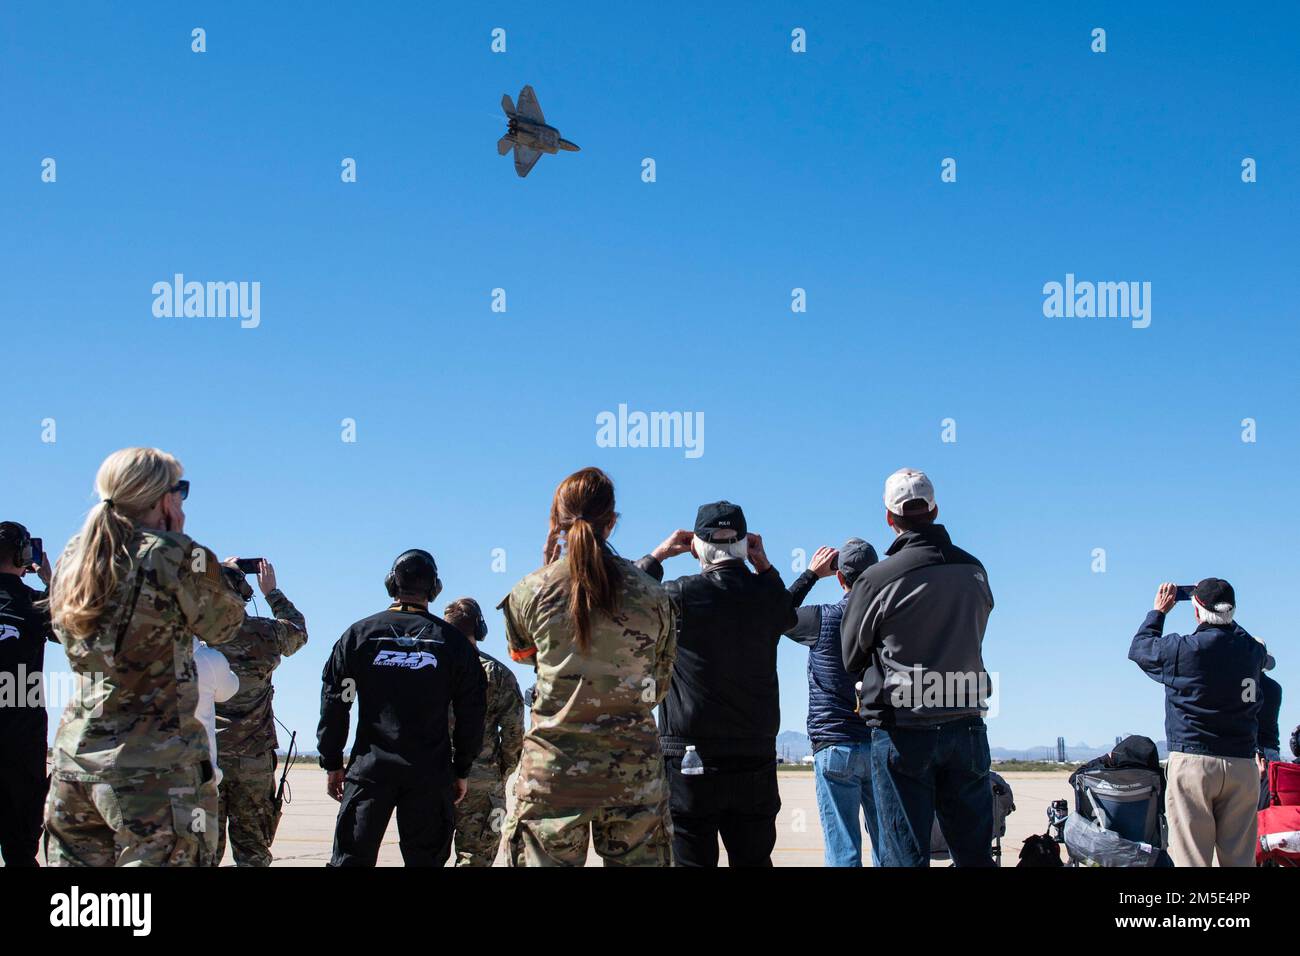 Members of the U.S. military and Heritage Flight attendees watch the F-22 Raptor Demonstration Team performance during the Heritage Flight Training Course at Davis-Monthan Air Force Base, Arizona, March 6, 2022. During the event, civilian warbird pilots and current Air Force demonstration pilots trained together in preparation for the 2022 air show season. Stock Photo